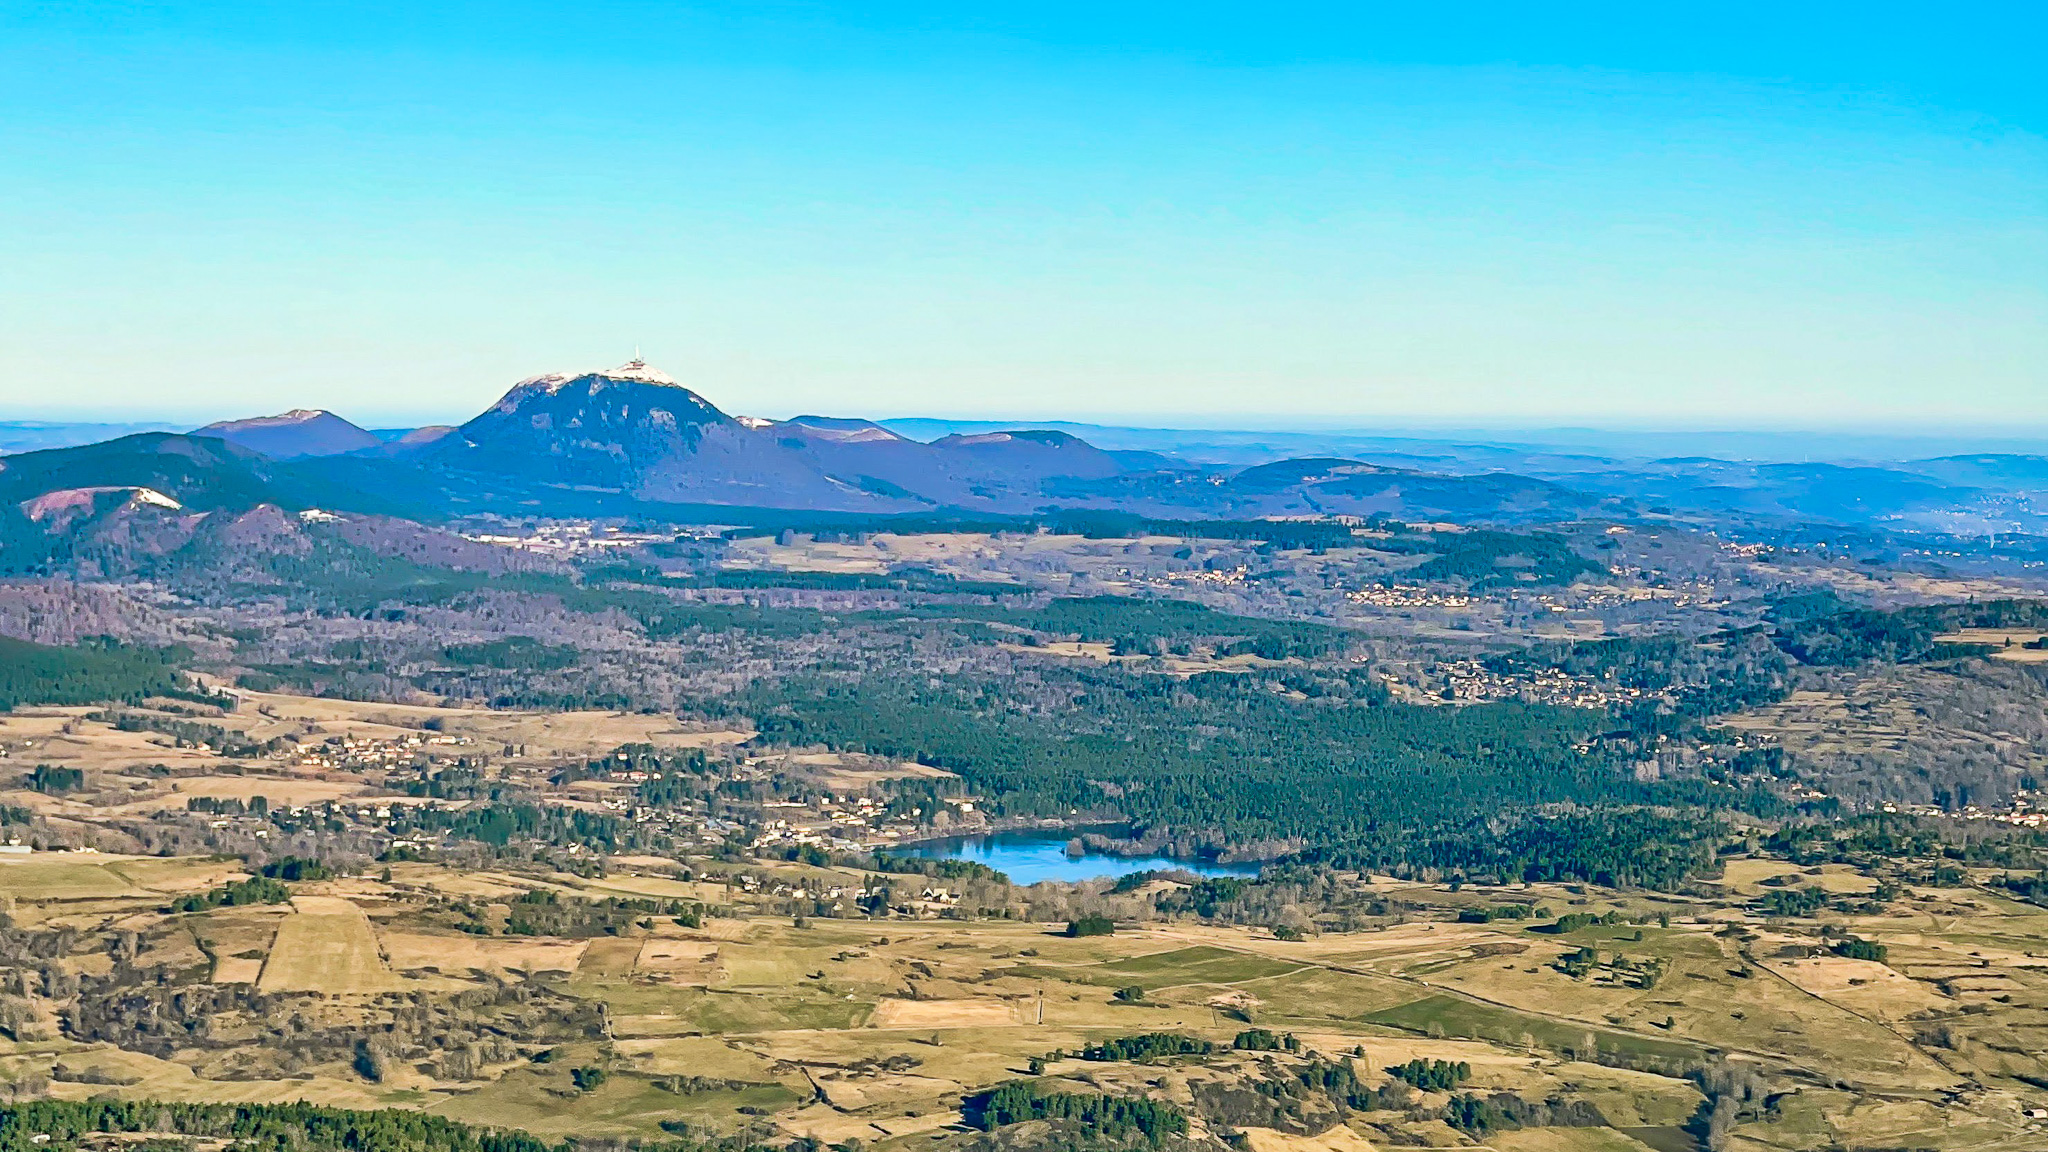 Aydat Lake and Puy de Dôme Summit